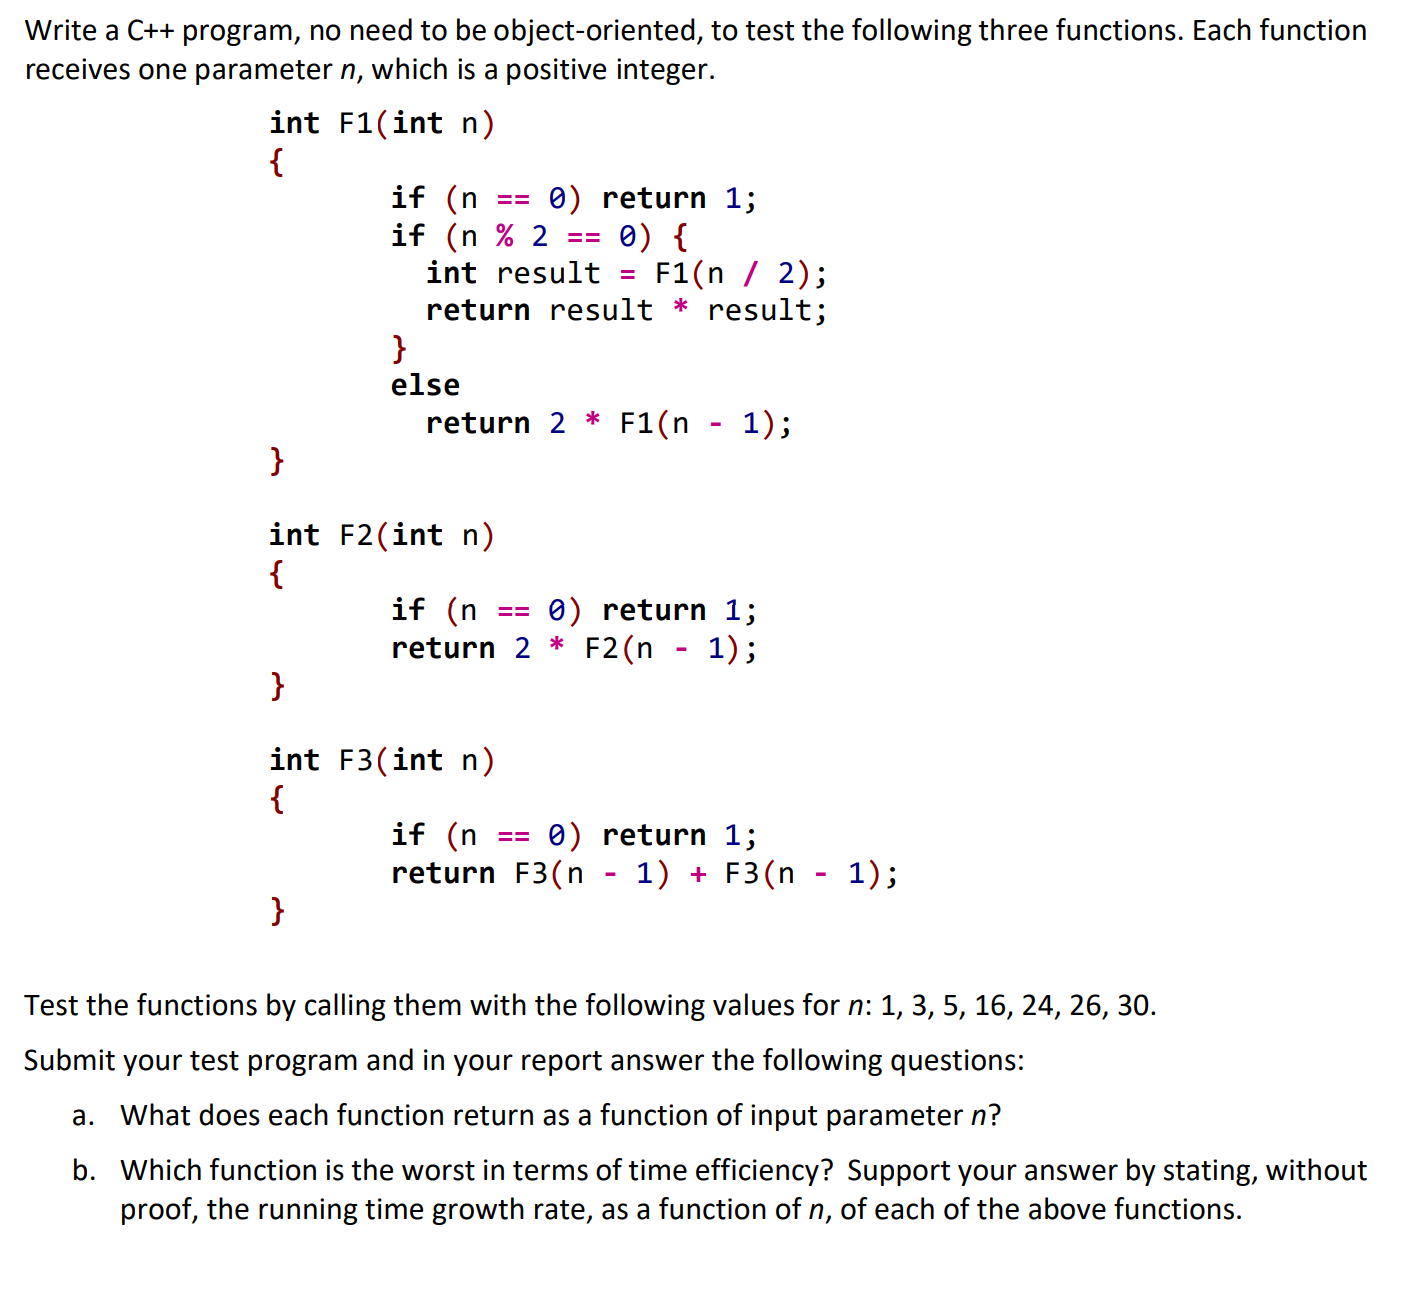 Write a C++ program, no need to be object-oriented, to test the following three functions. Each function
receives one parameter n, which is a positive integer.
int F1(int n)
{
if (n
if (n % 2
int result
0) return 1;
0) {
F1(n / 2);
return result * result;
else
1);
return 2 * F1(n
}
int F2(int n)
{
if (n
return 2 * F2(n - 1);
0) return 1;
int F3(int n)
{
if (n
0) return 1;
return F3(n - 1) + F3(n - 1);
}
Test the functions by calling them with the following values for n: 1, 3, 5, 16, 24, 26, 30.
Submit your test program and in your report answer the following questions:
a. What does each function return as a function of input parameter n?
b. Which function is the worst in terms of time efficiency? Support your answer by stating, without
proof, the running time growth rate, as a function of n, of each of the above functions.
